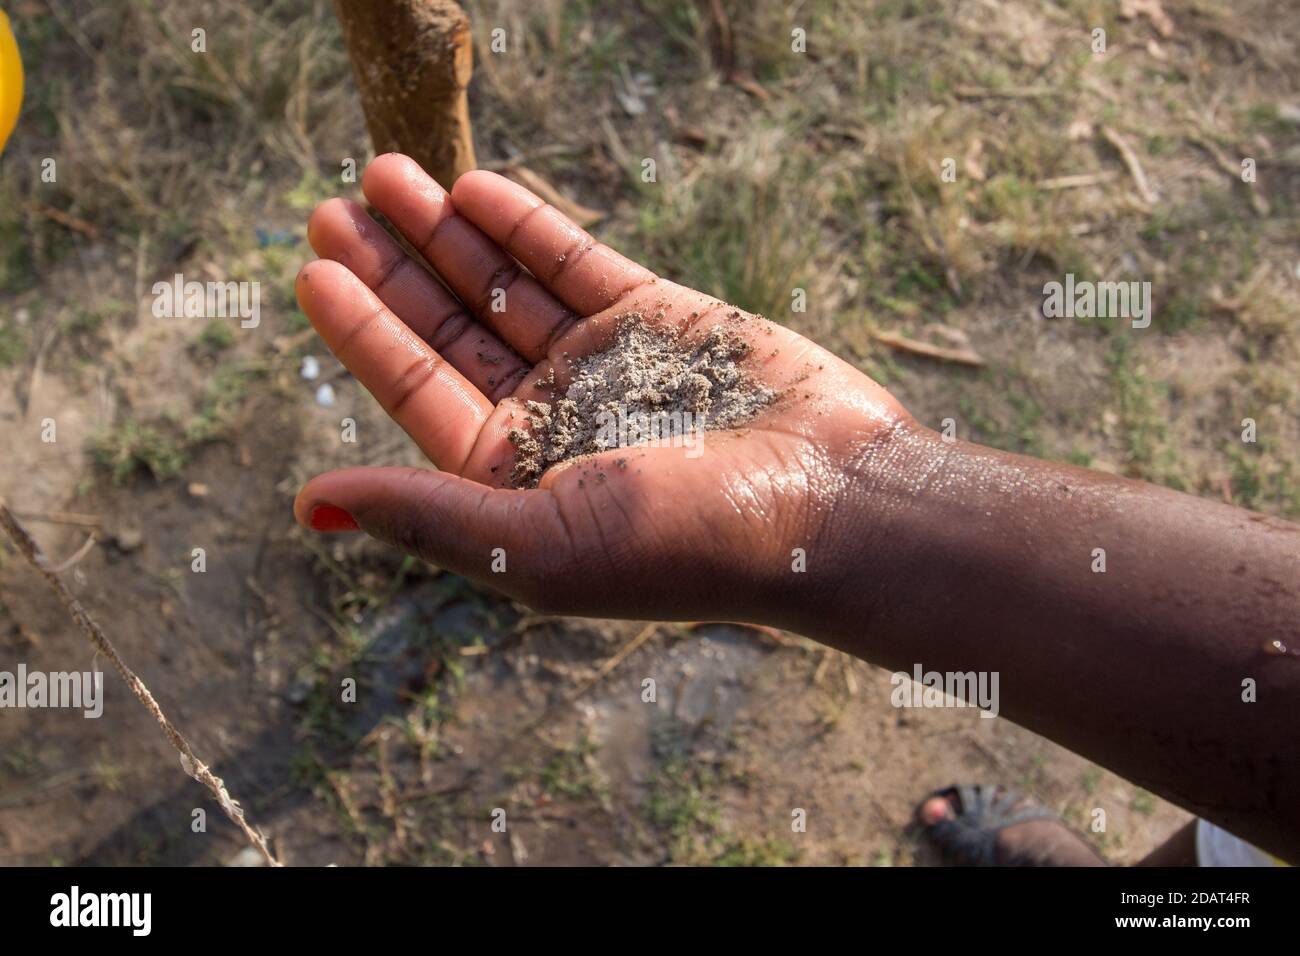 Hand washing with ash as an alternative to soap. WHO guidelines currently recommend that ash can be used for hand cleaning when soap is not available Stock Photo